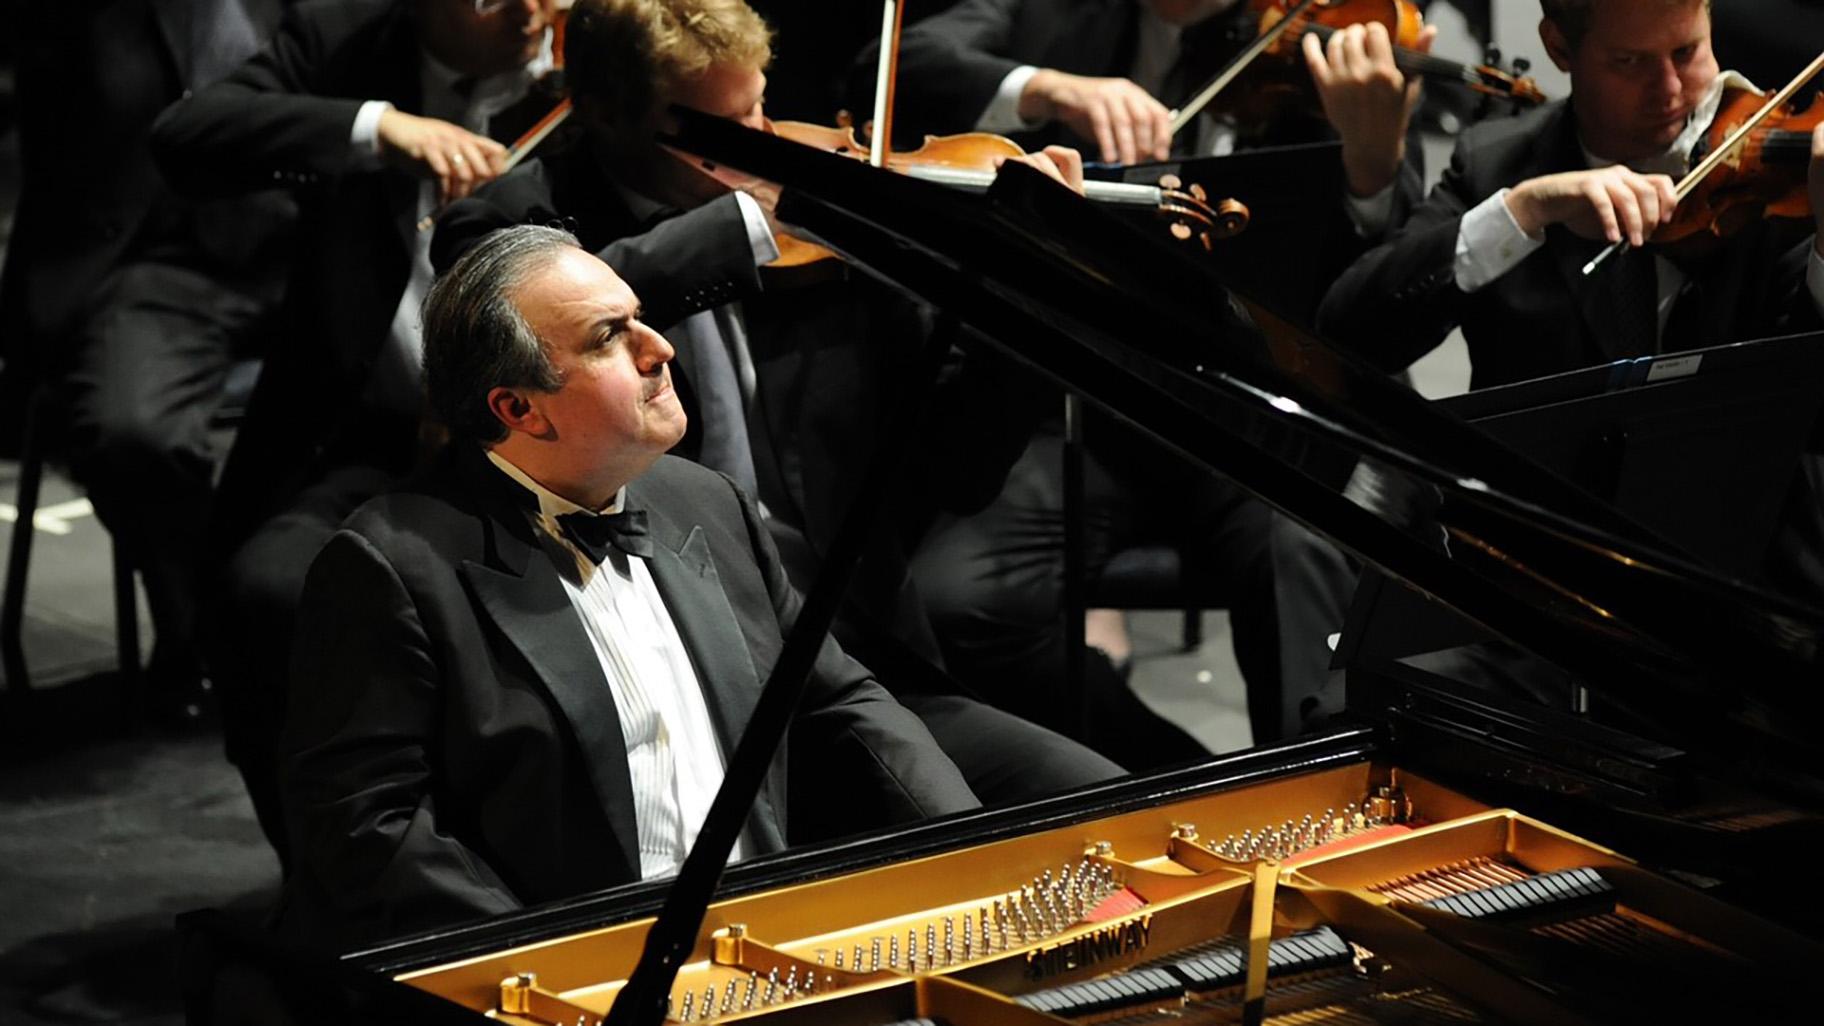 Yefim Bronfman is pictured in a provided publicity photo. (Credit: Frank Stewart)